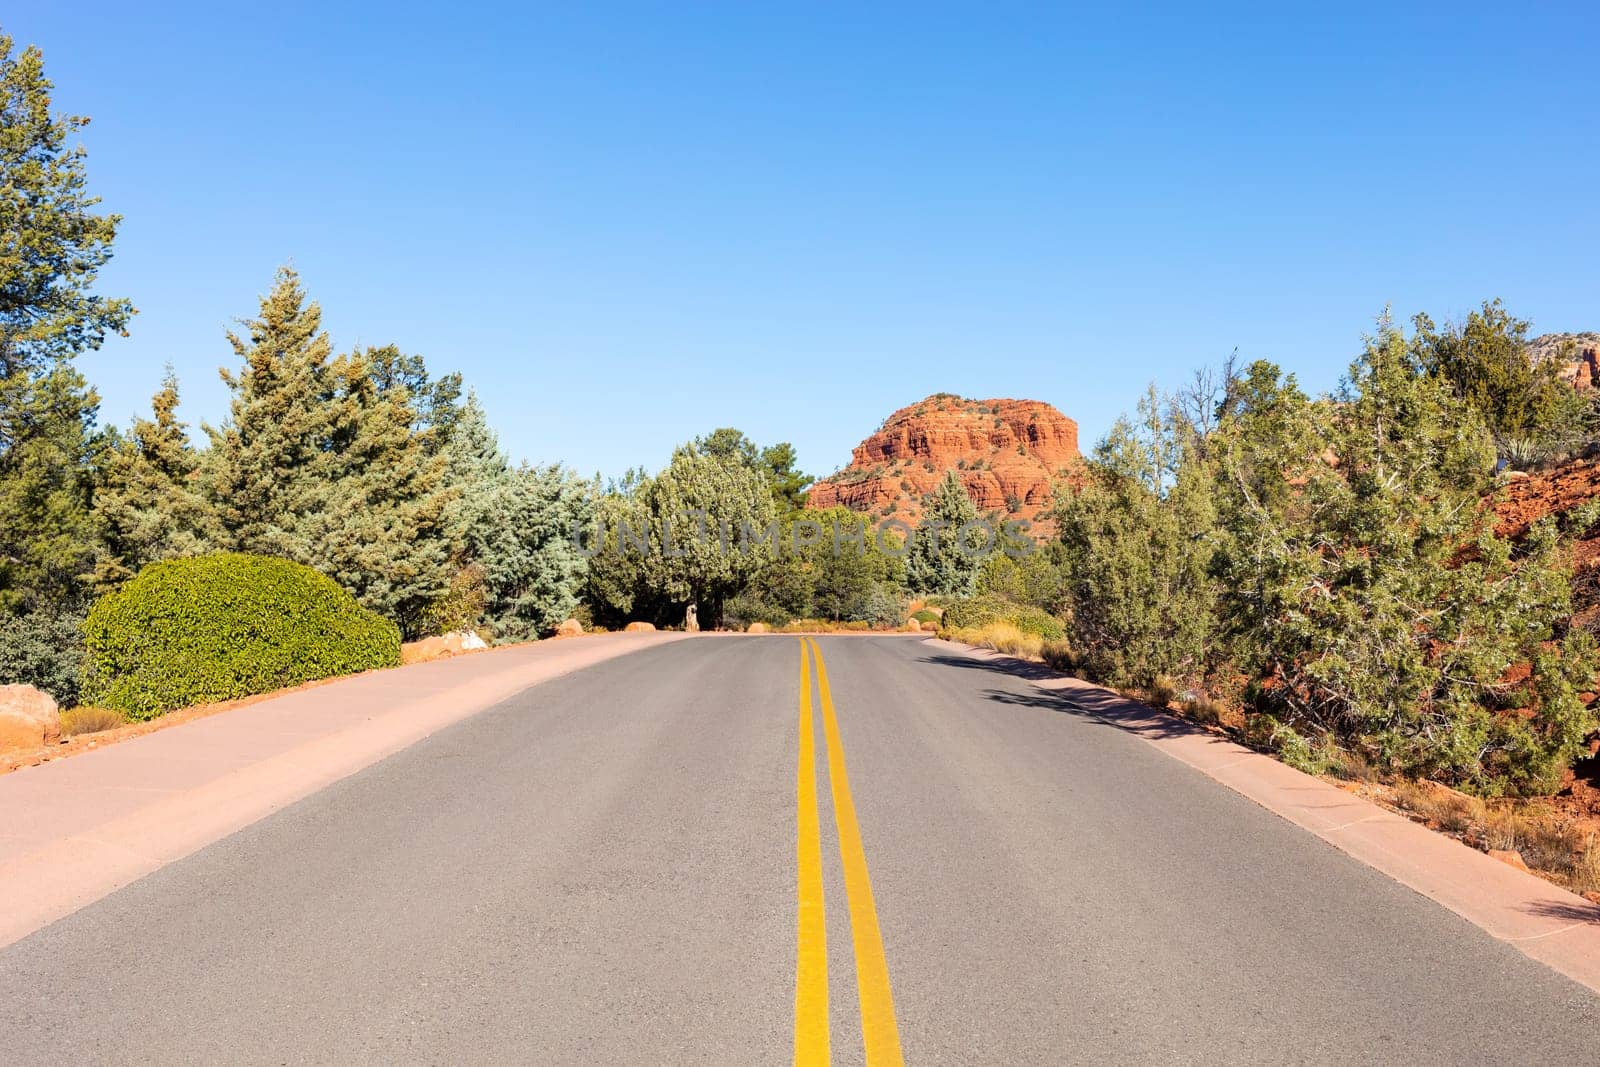 Long Straight Road Leading Towards Red Rock Mountain Butte Of Sedona, Arizona, USA Within Coconino National Forest. Beautiful Scenic Landscape. Attraction, Spiritual Place. Horizontal by netatsi